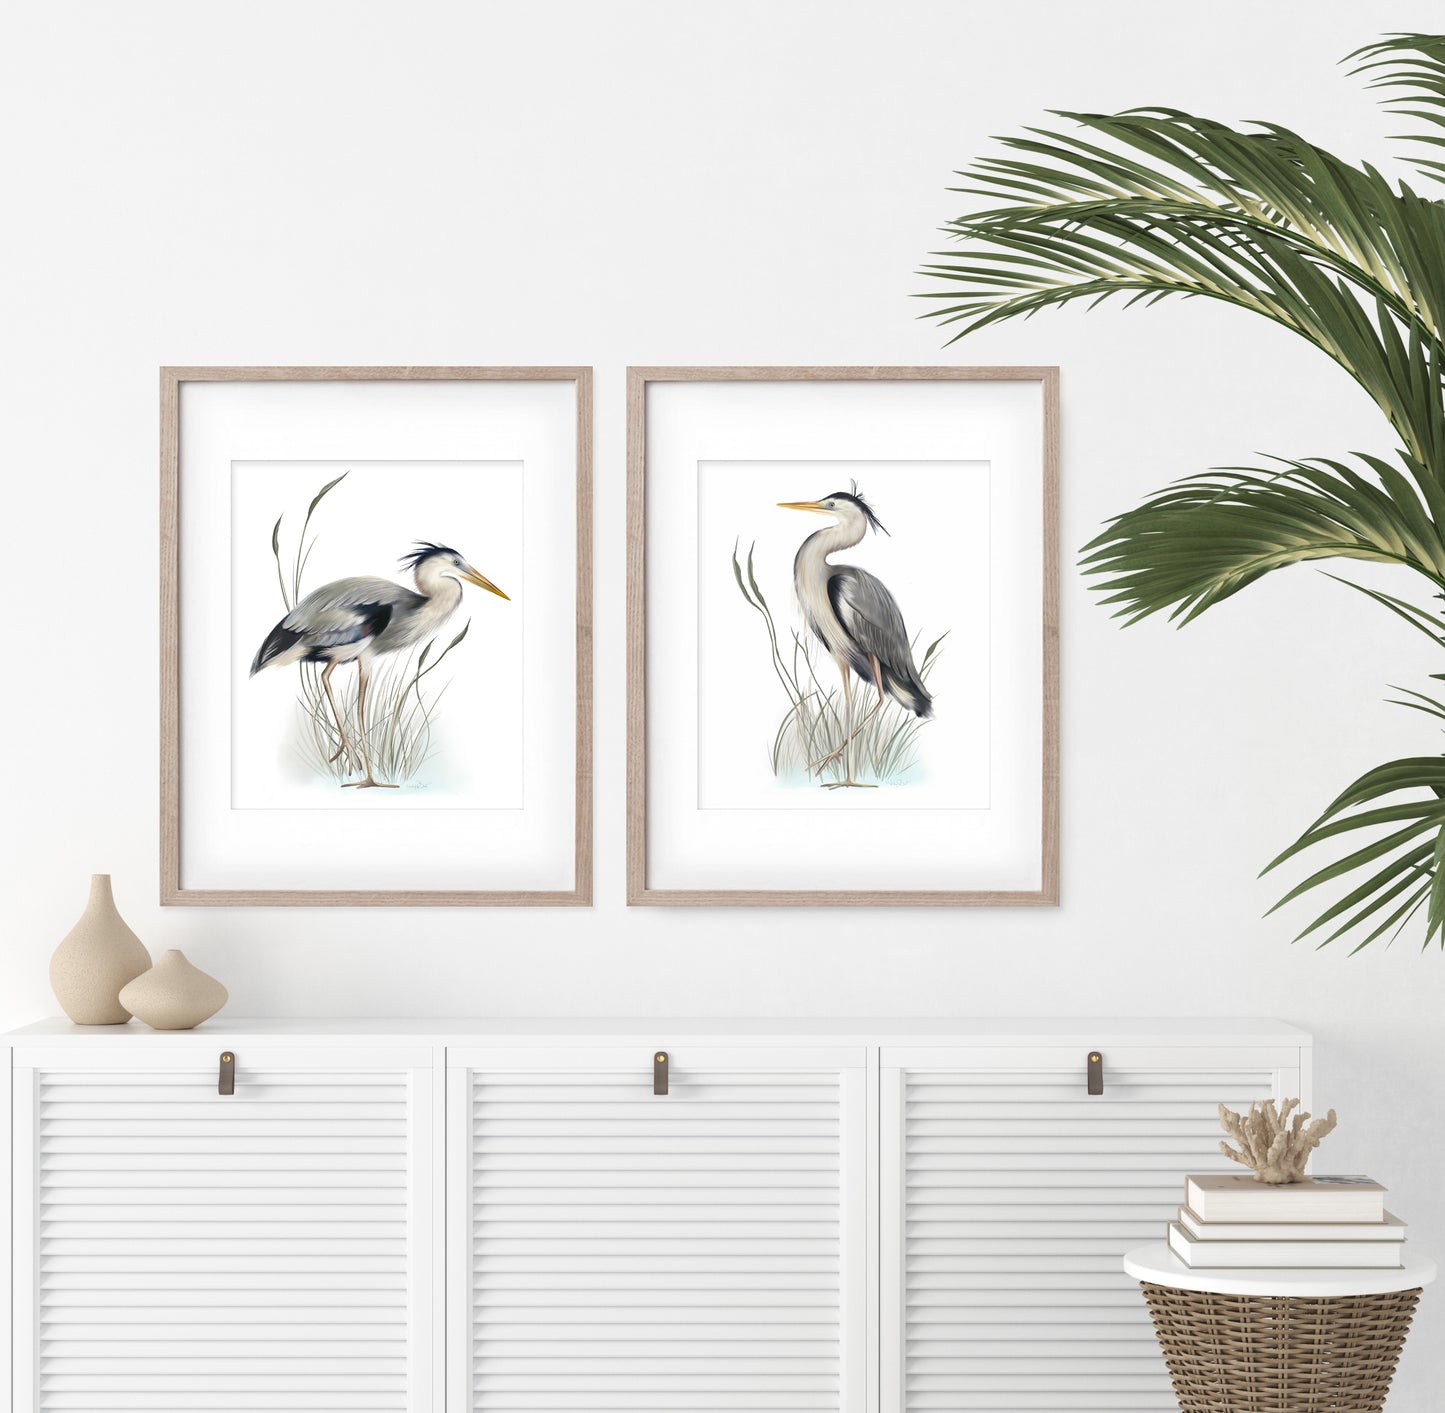 Set of 2 Great Blue Heron Birds in tall grasses art illustration prints on white in wood frames hanging above a white credenza in a living room - Studio Q - Art by Nicky Quartermaine Scott